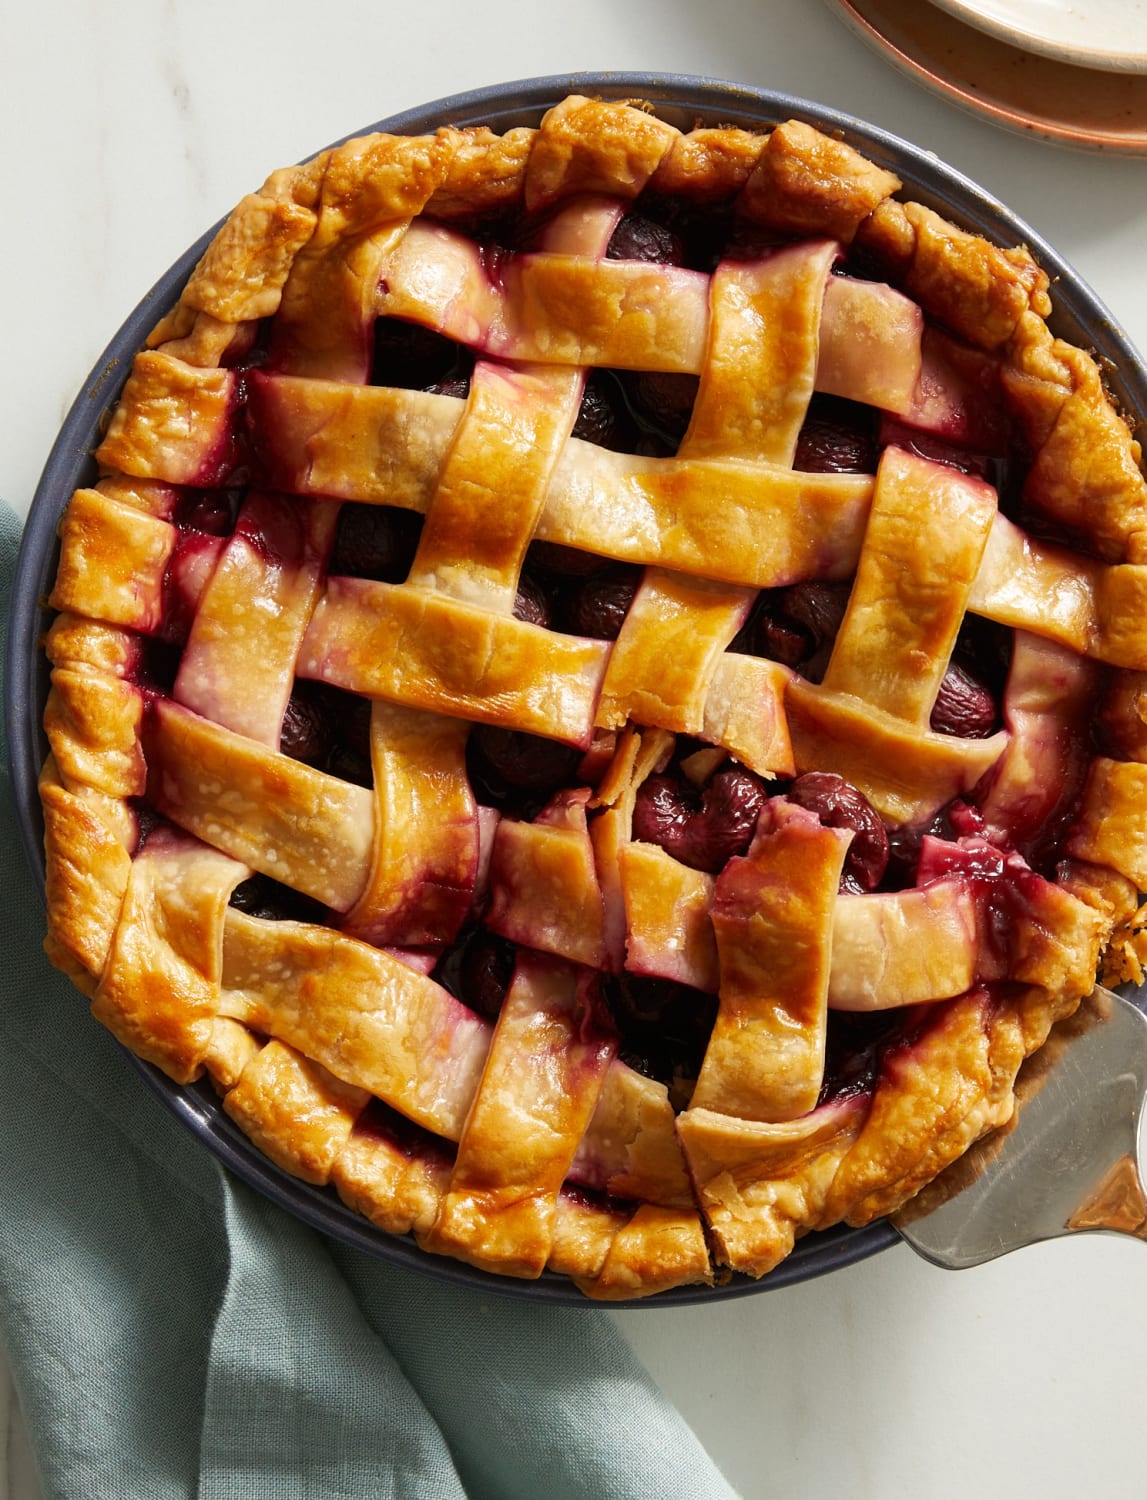 Serious Eats' cherry pie recipe taught Justin some valuable baking lessons: